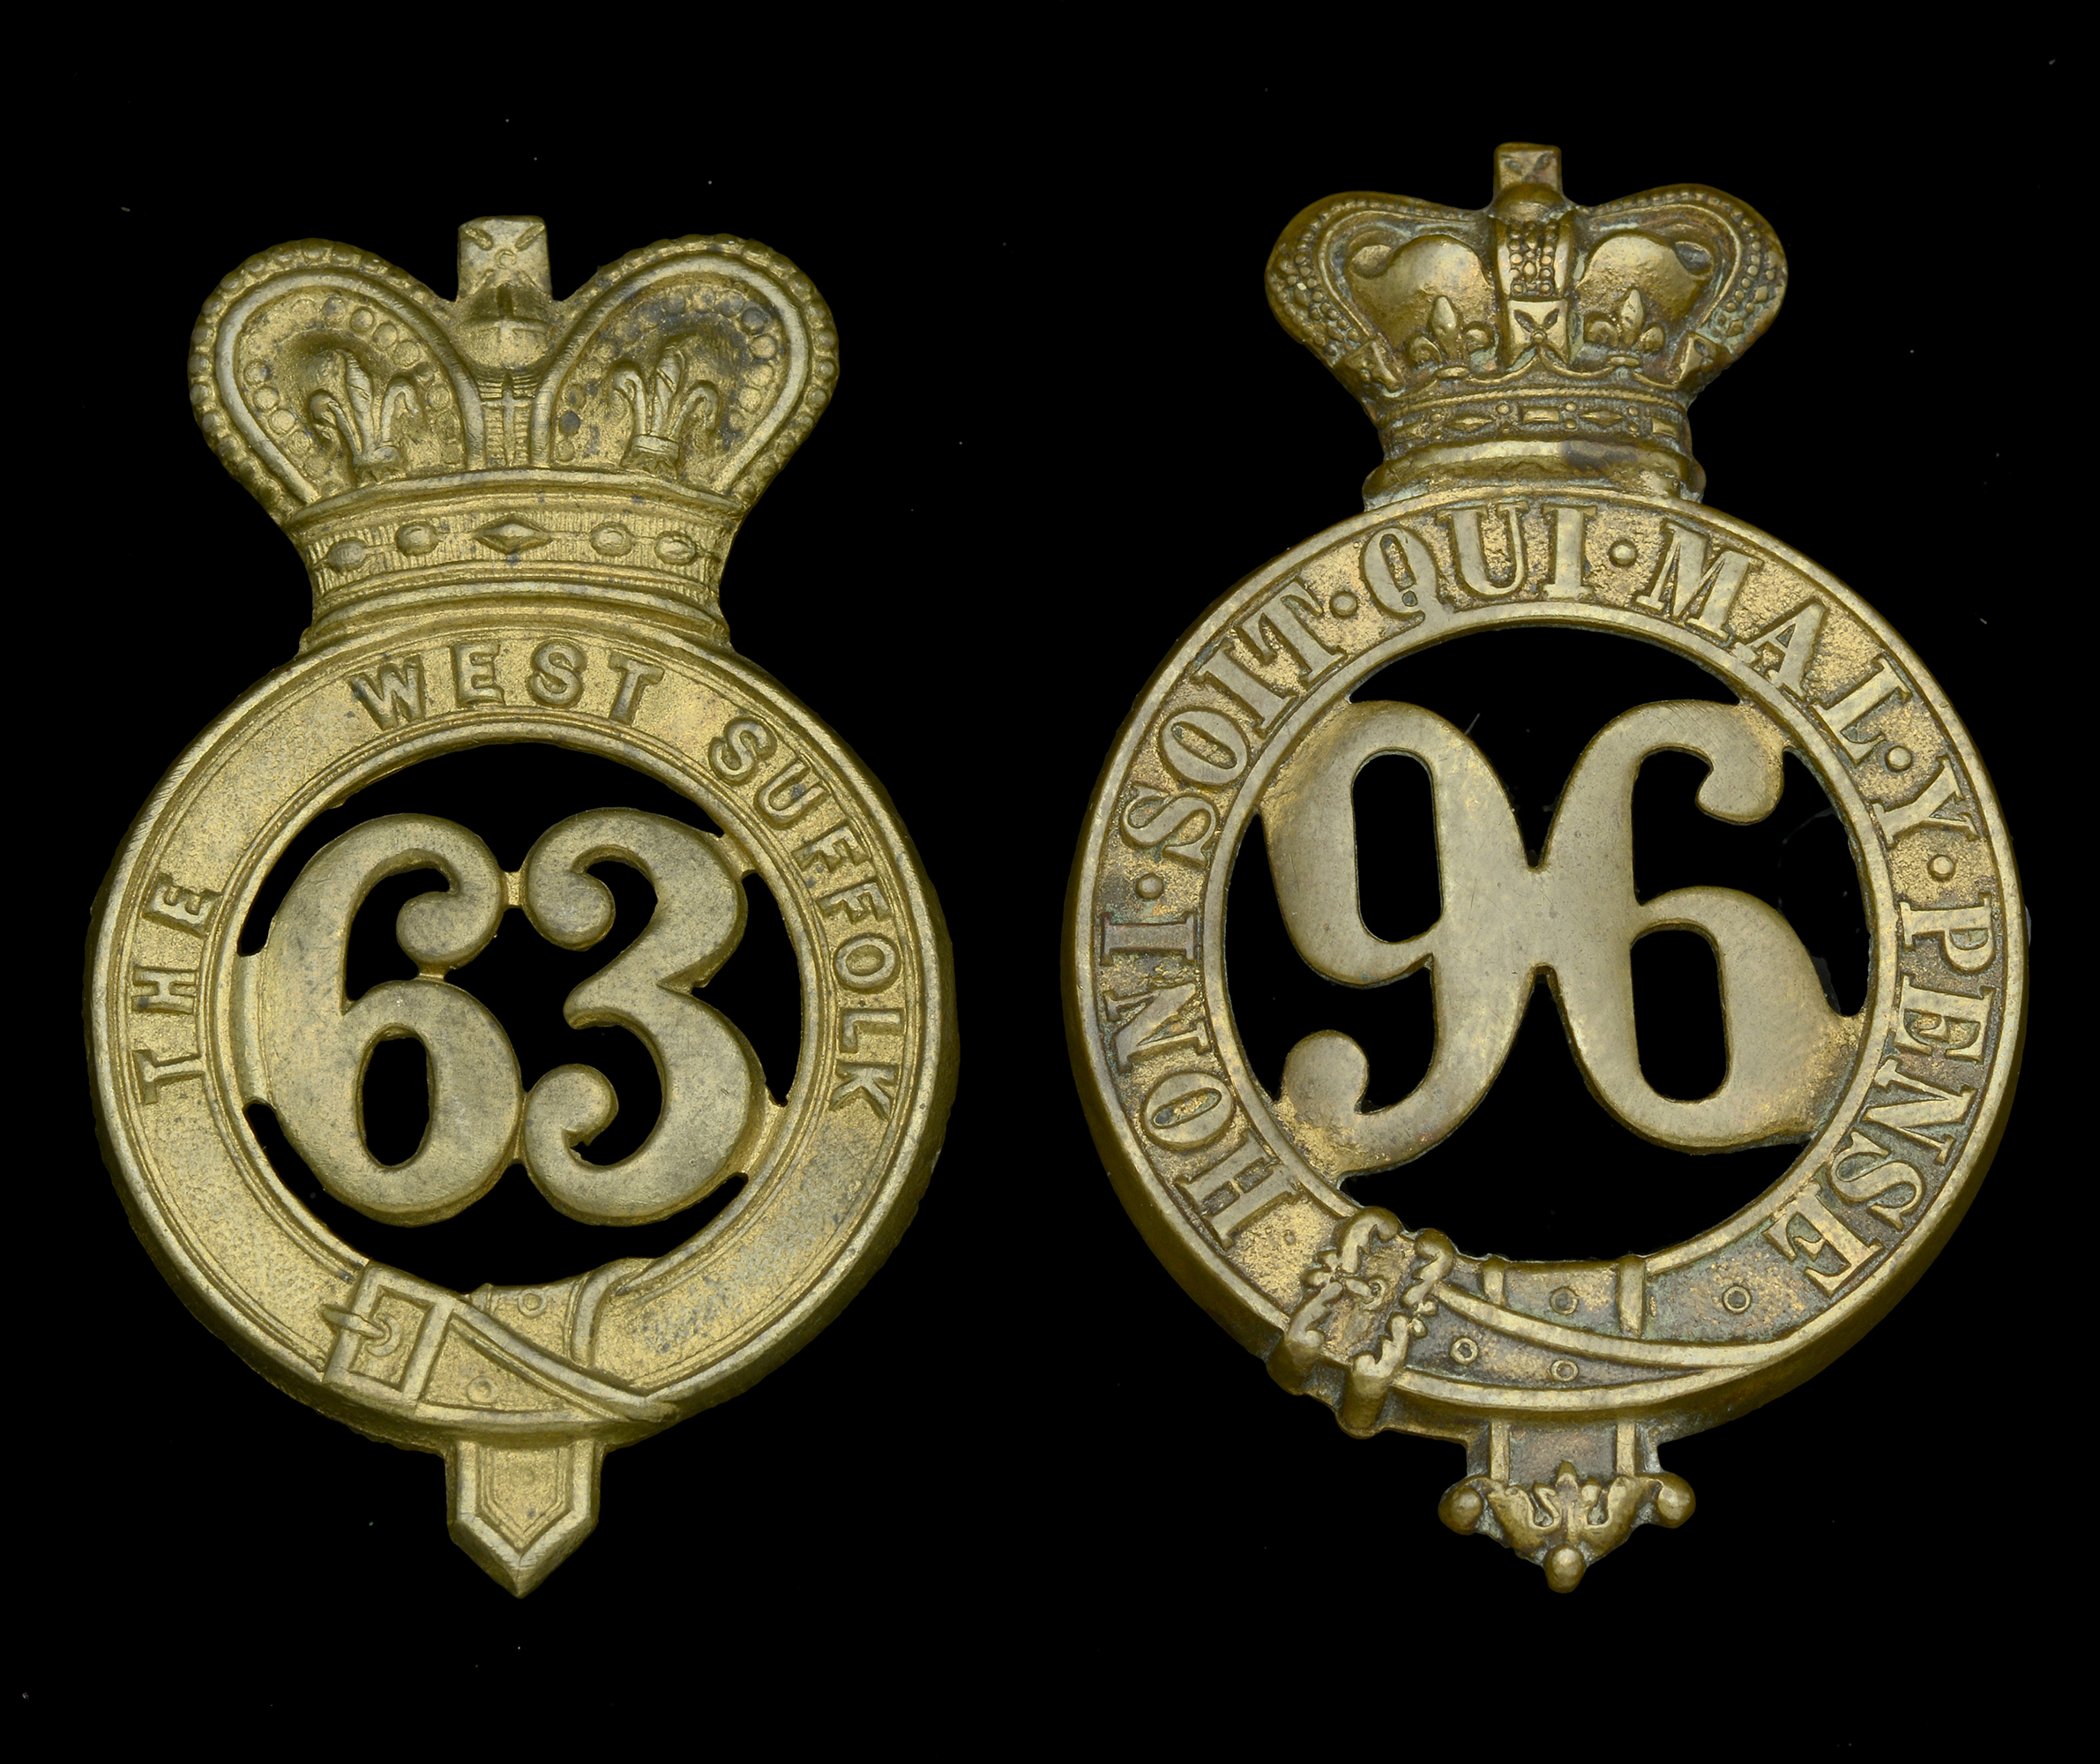 63rd and 96th Regiments of Foot Glengarry Badges. Two Victorian other ranks Glengarry Badge...